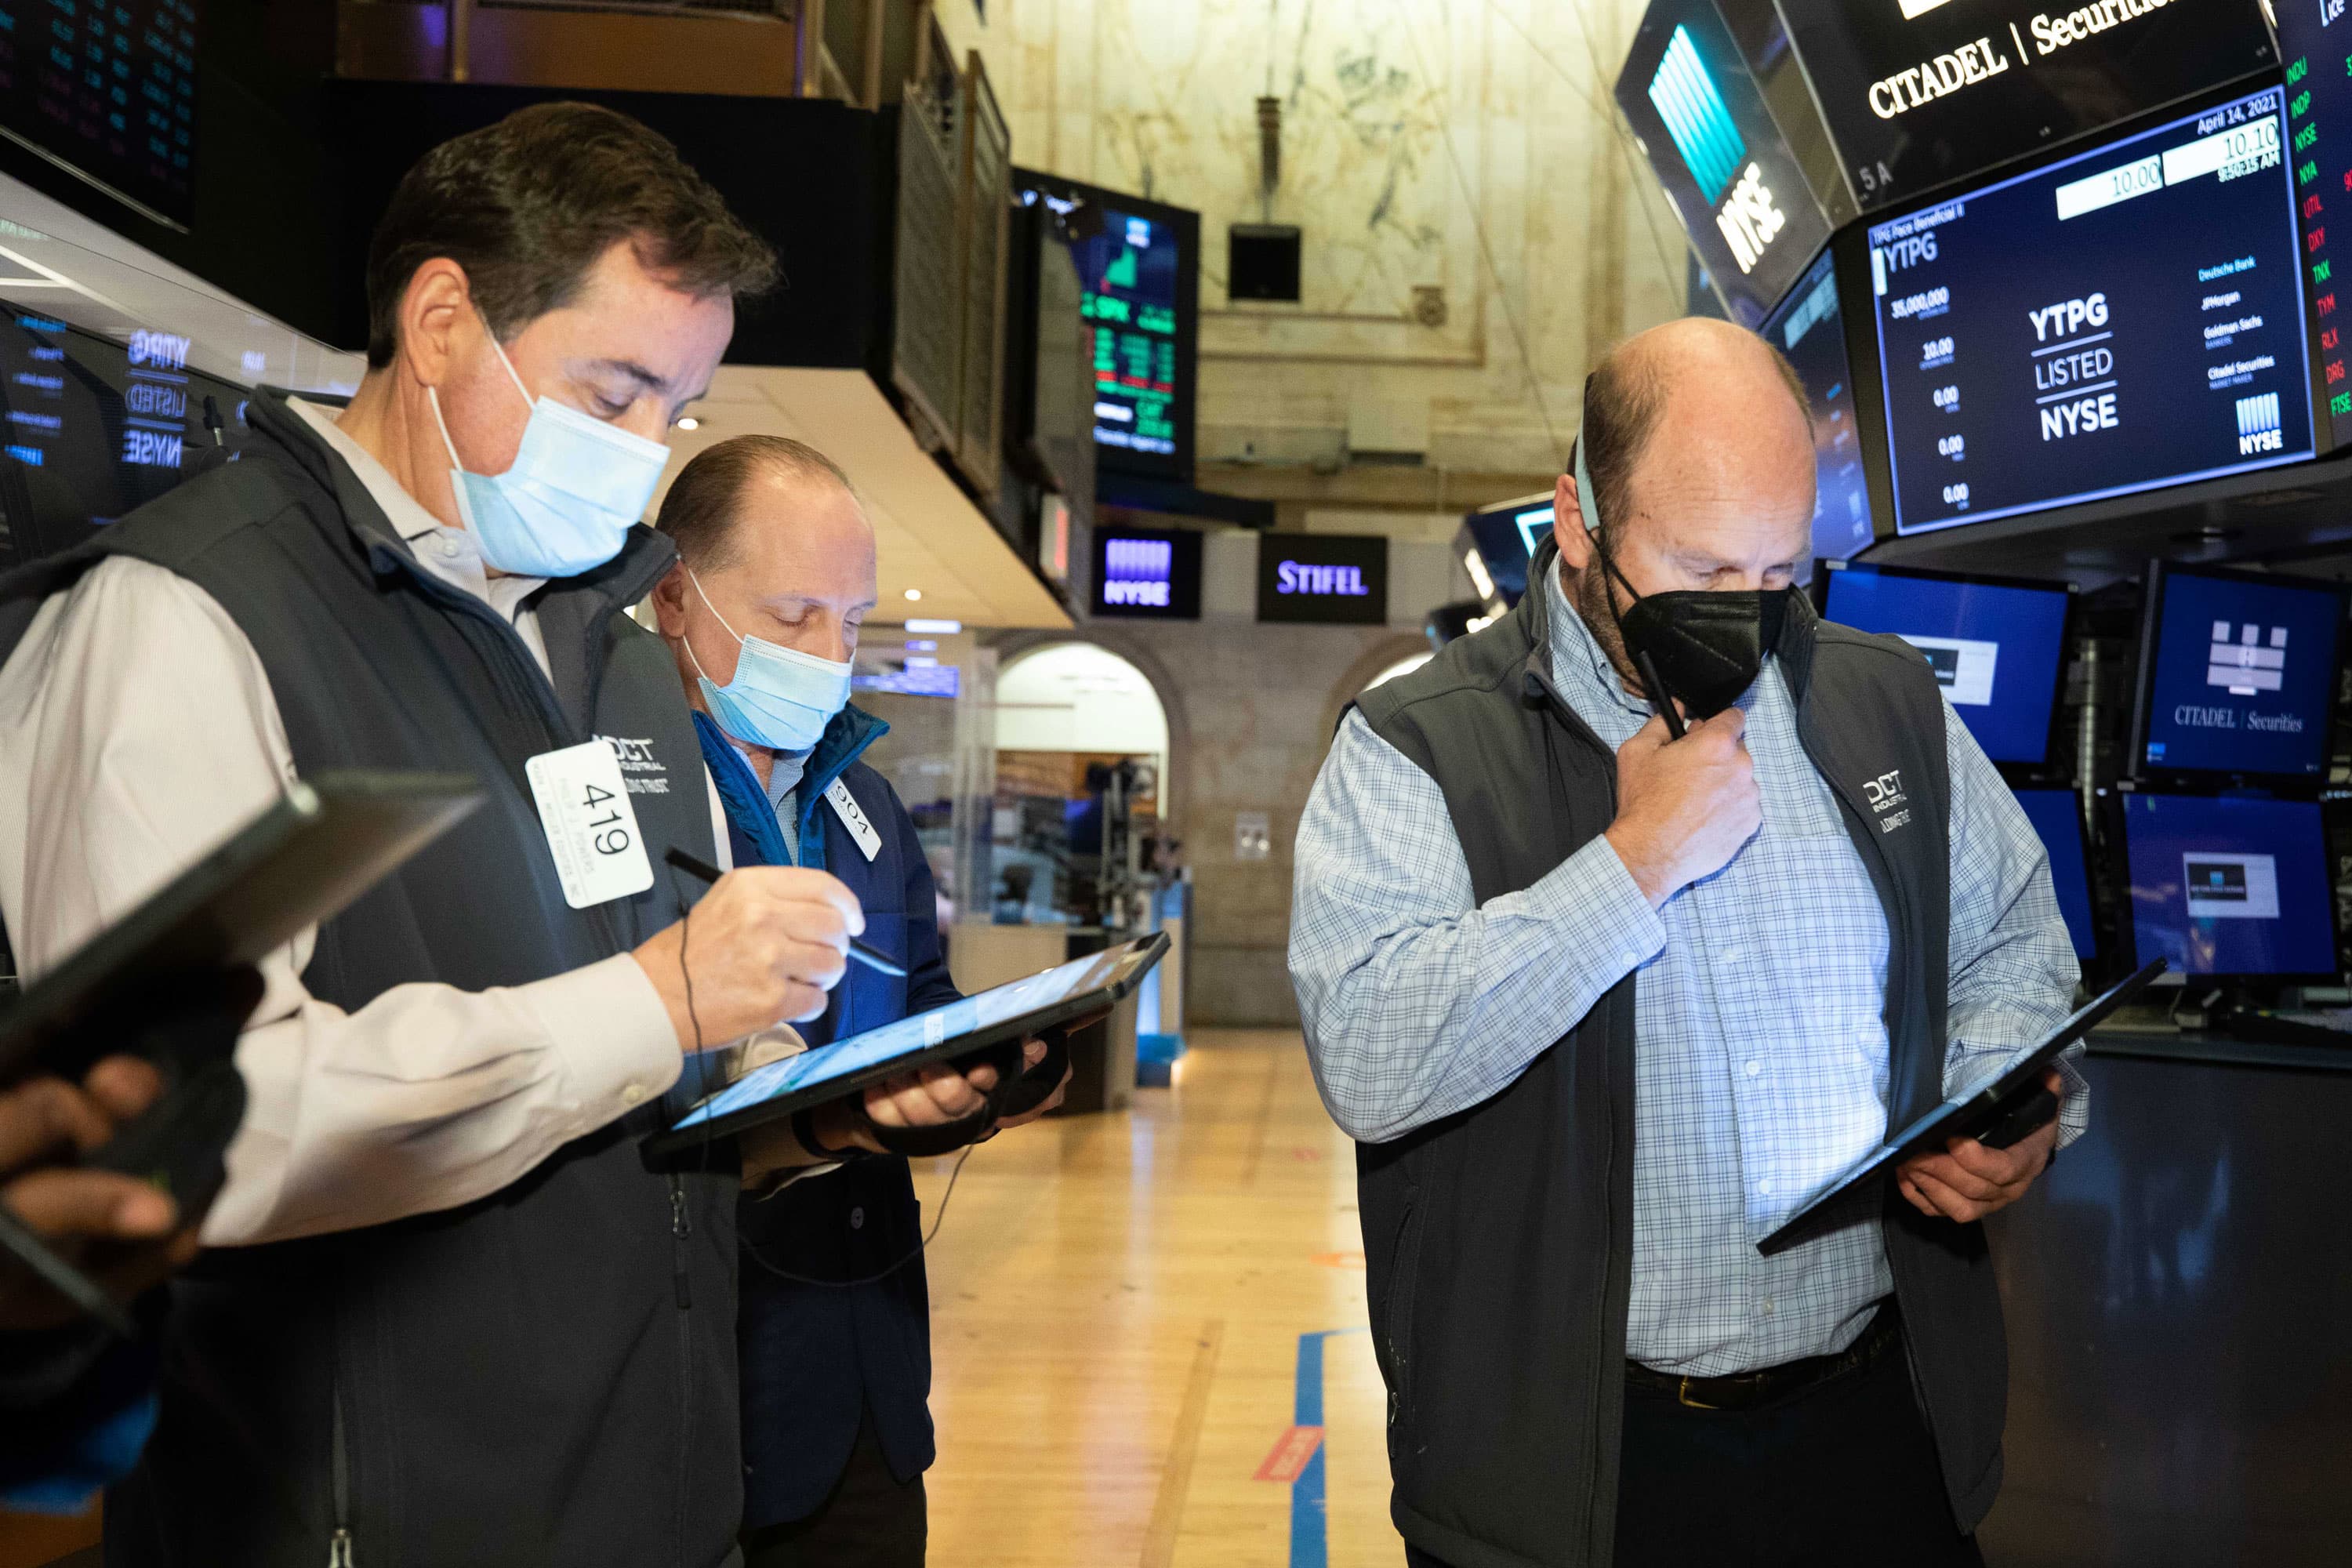 5 Things You Should Know Before The Stock Market Opens Tuesday, April 20